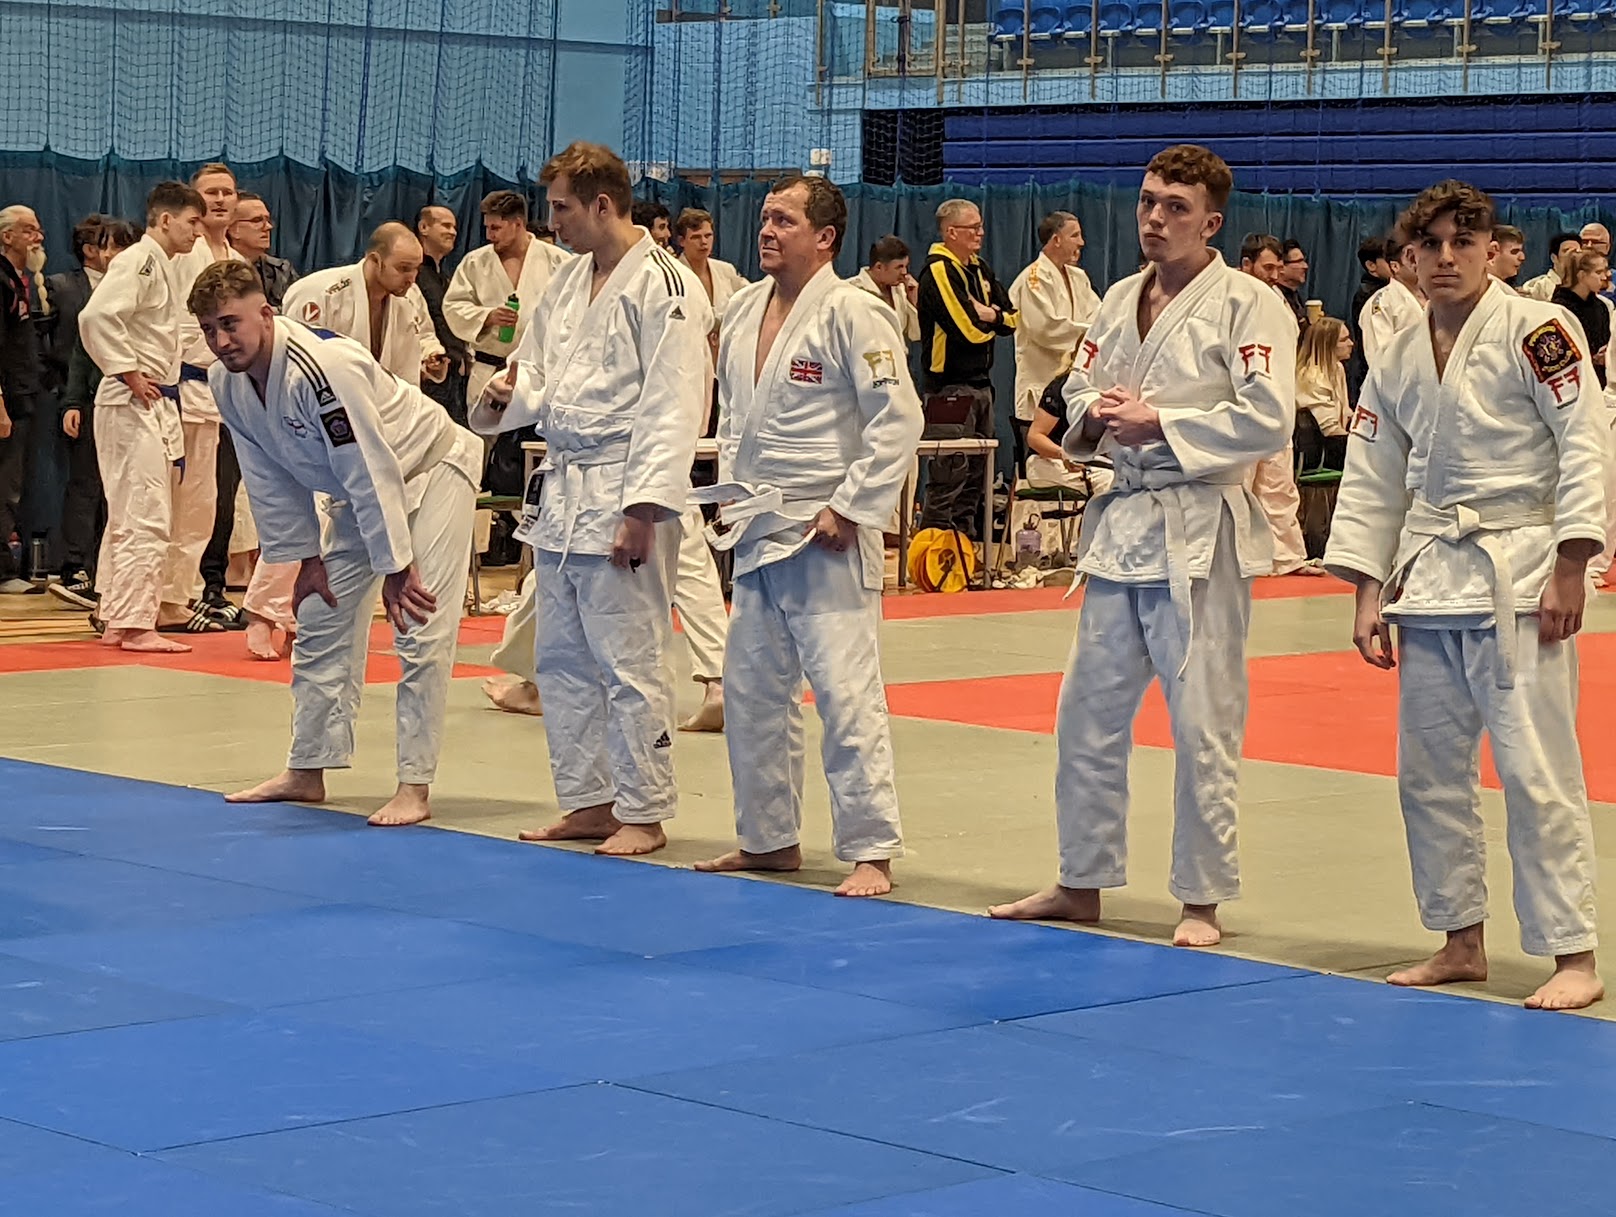 Judo Competition team image